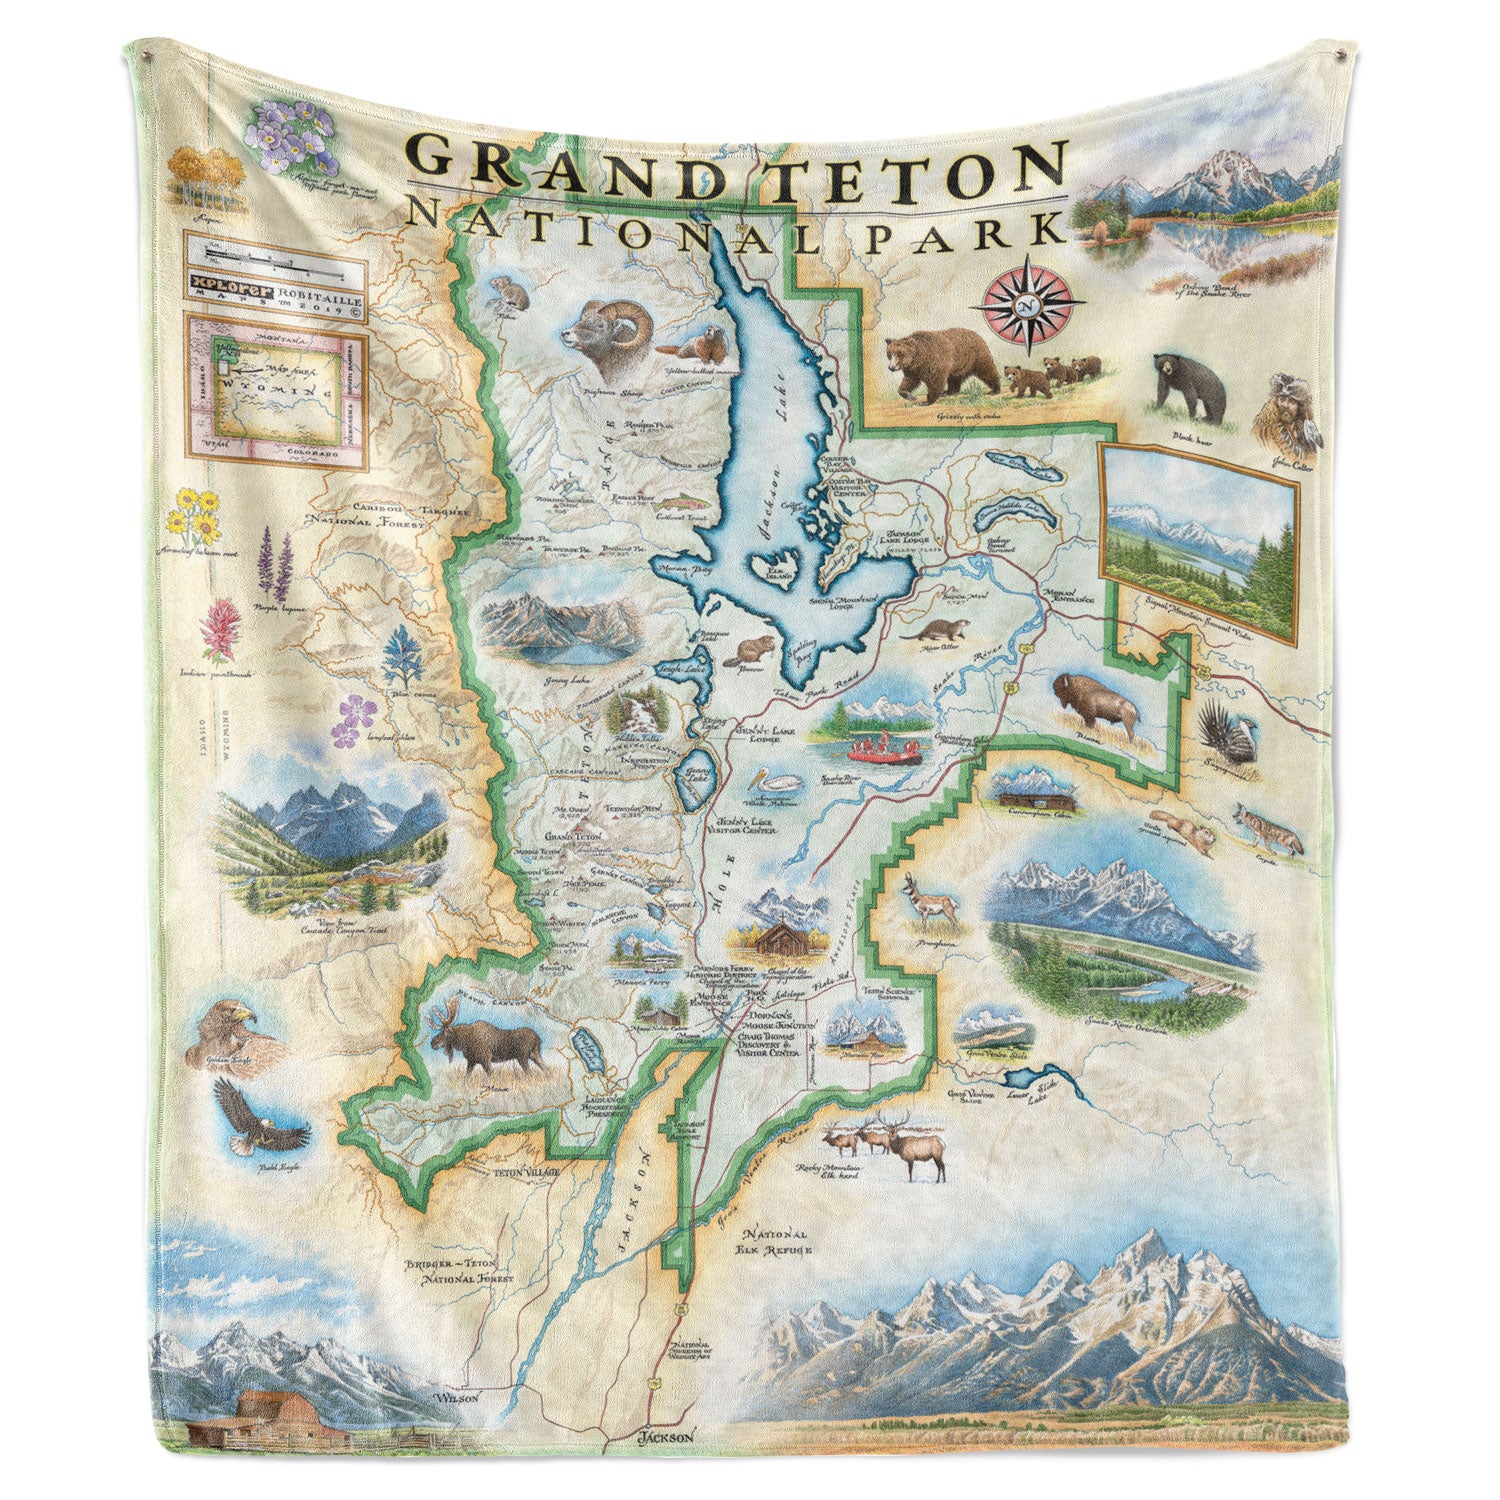 Hanging blanket featuring full color, hand drawn and painted map of Grand Teton. 